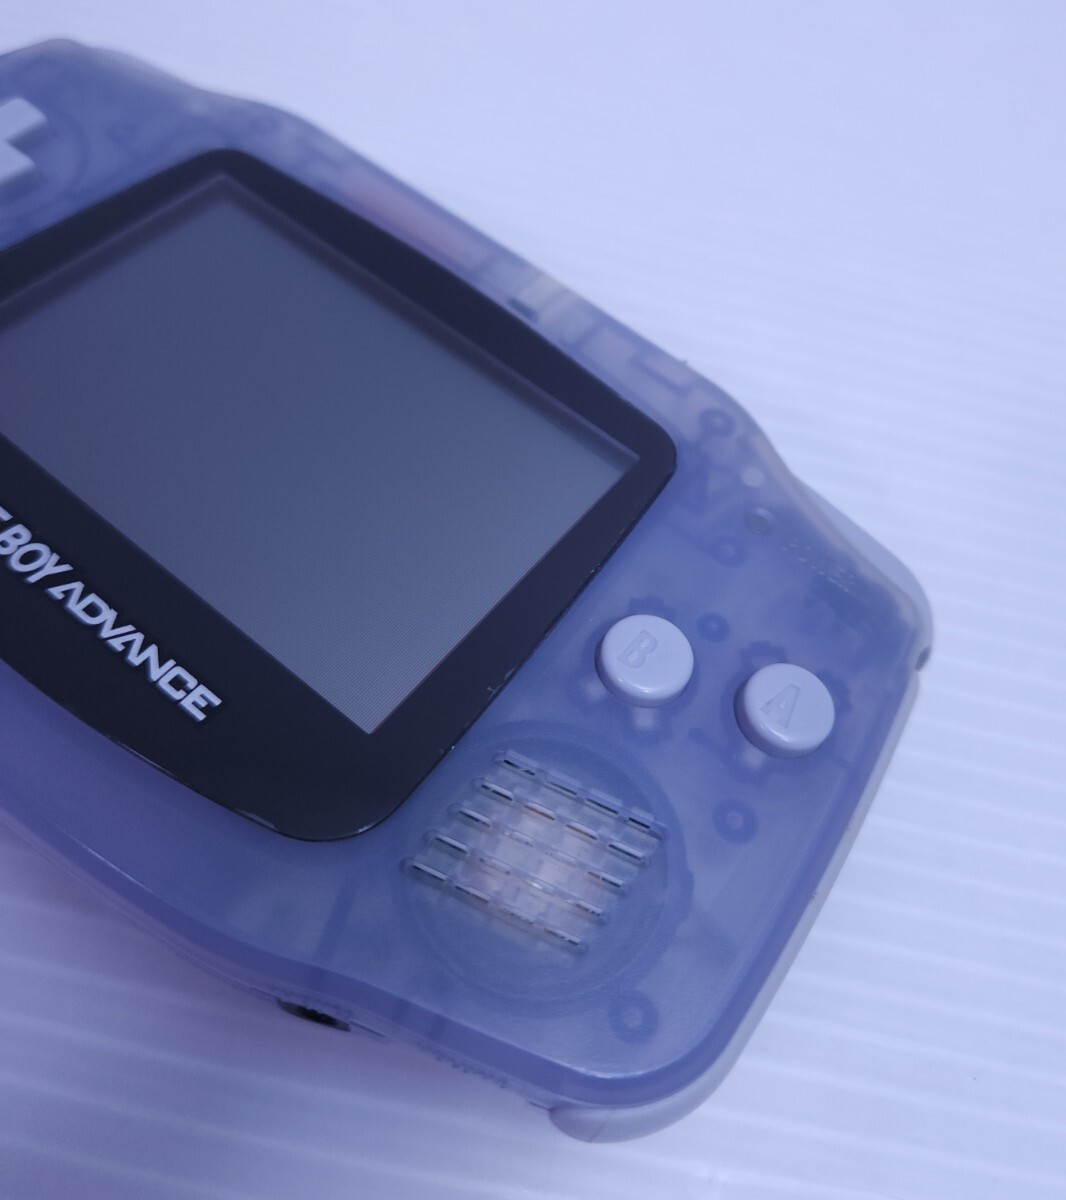  beautiful goods / operation goods / rare goods Game Boy Advance AGB-001 clear blue body + game soft set Game boy Advance GBA(H-189)